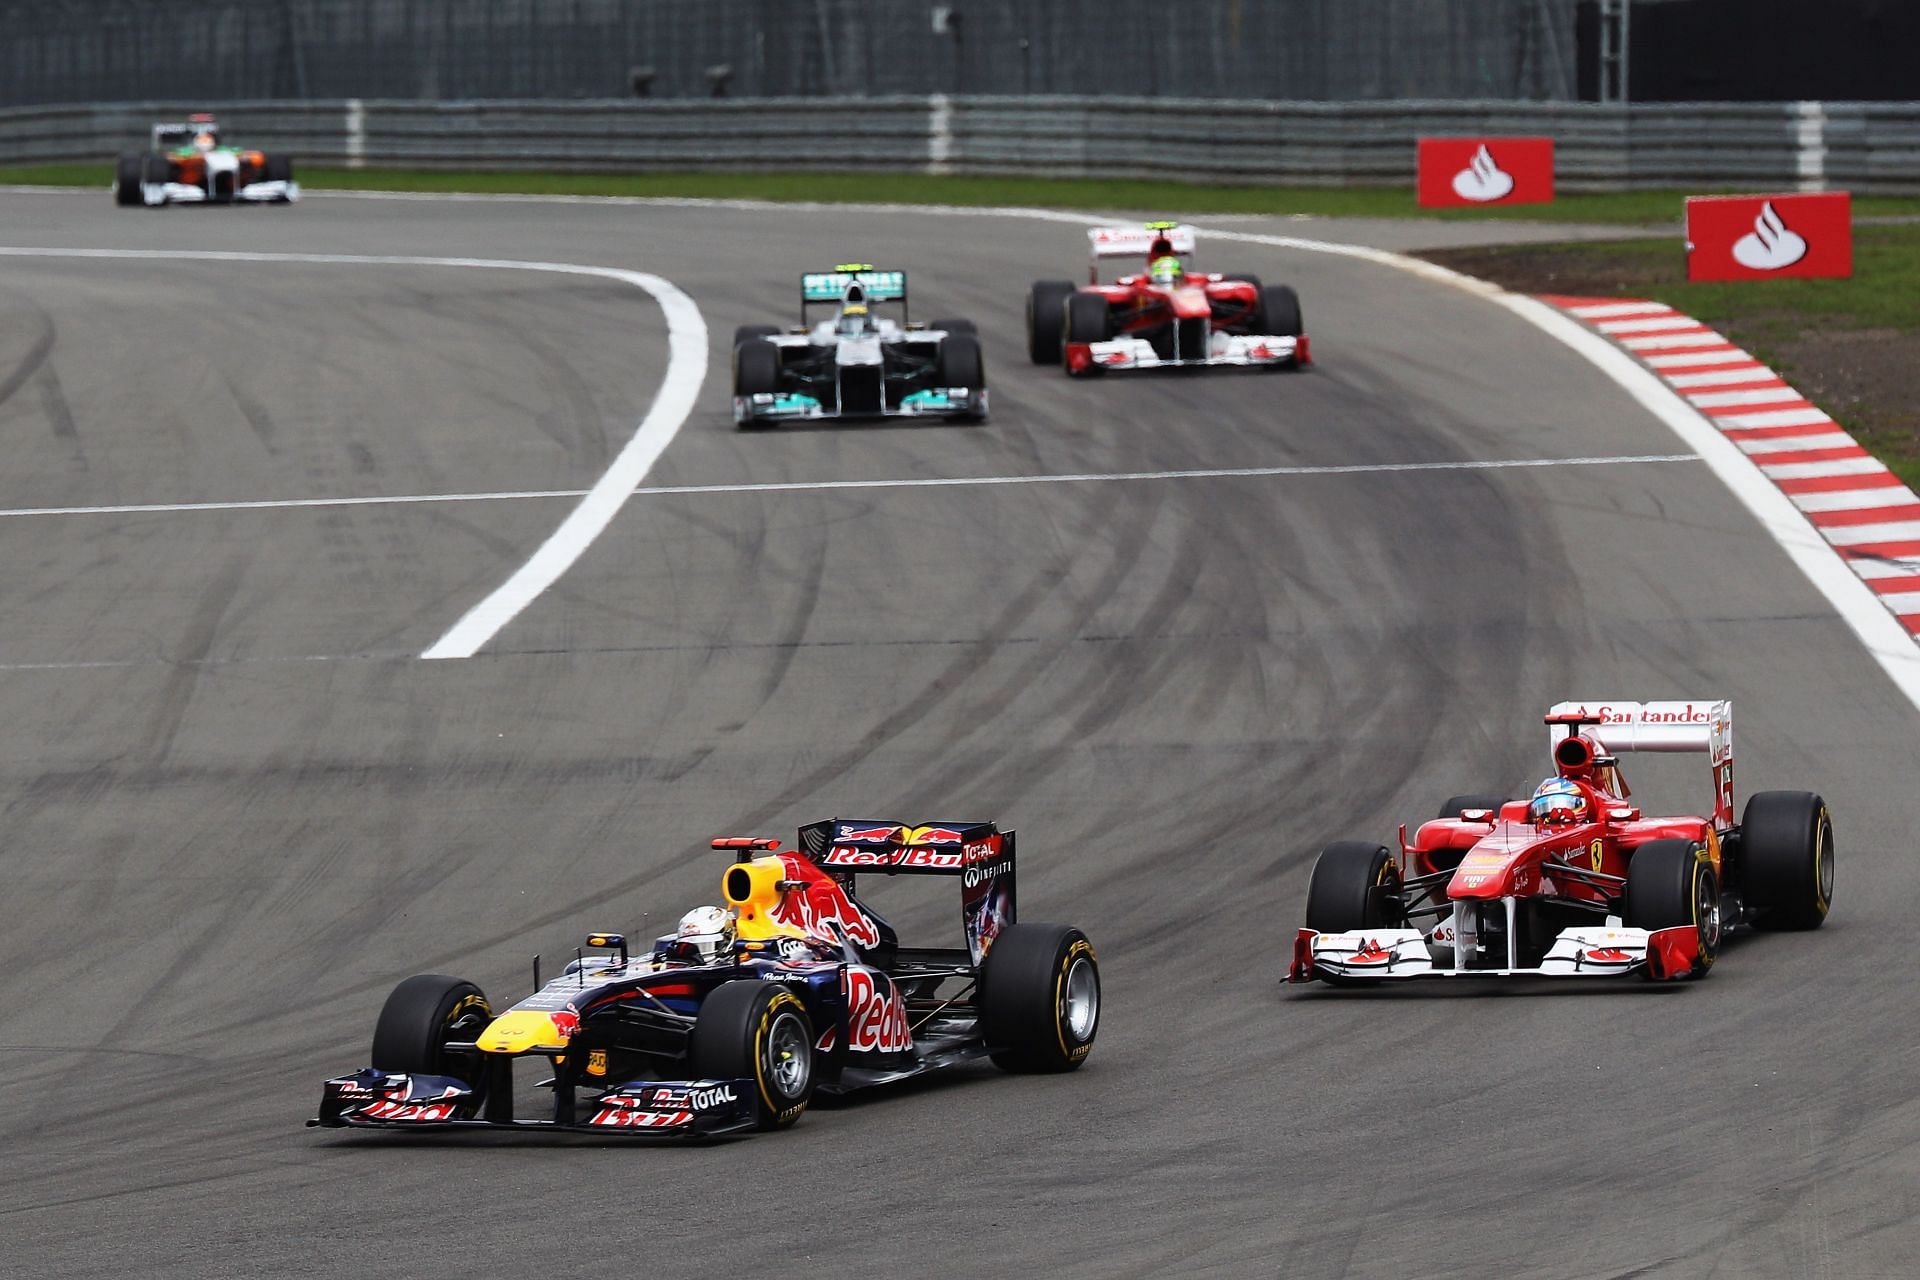 Fernando Alonso and Sebastian Vettel during the 2011 GP of Germany (Photo by Mark Thompson/Getty Images)